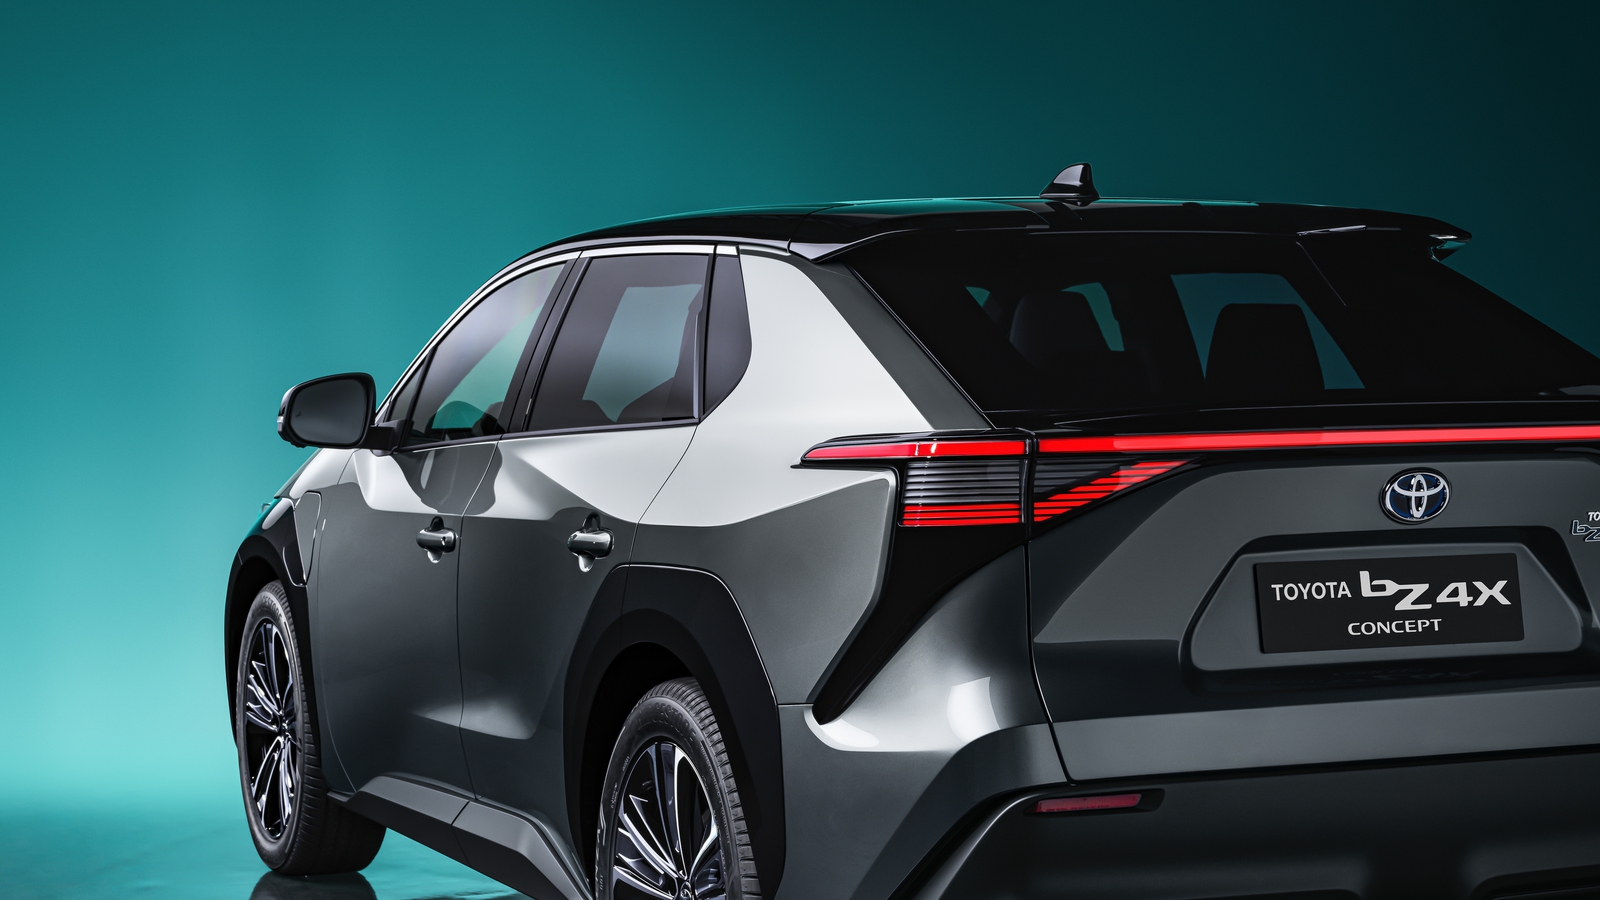 Toyota previews new mediumsized electric SUV.